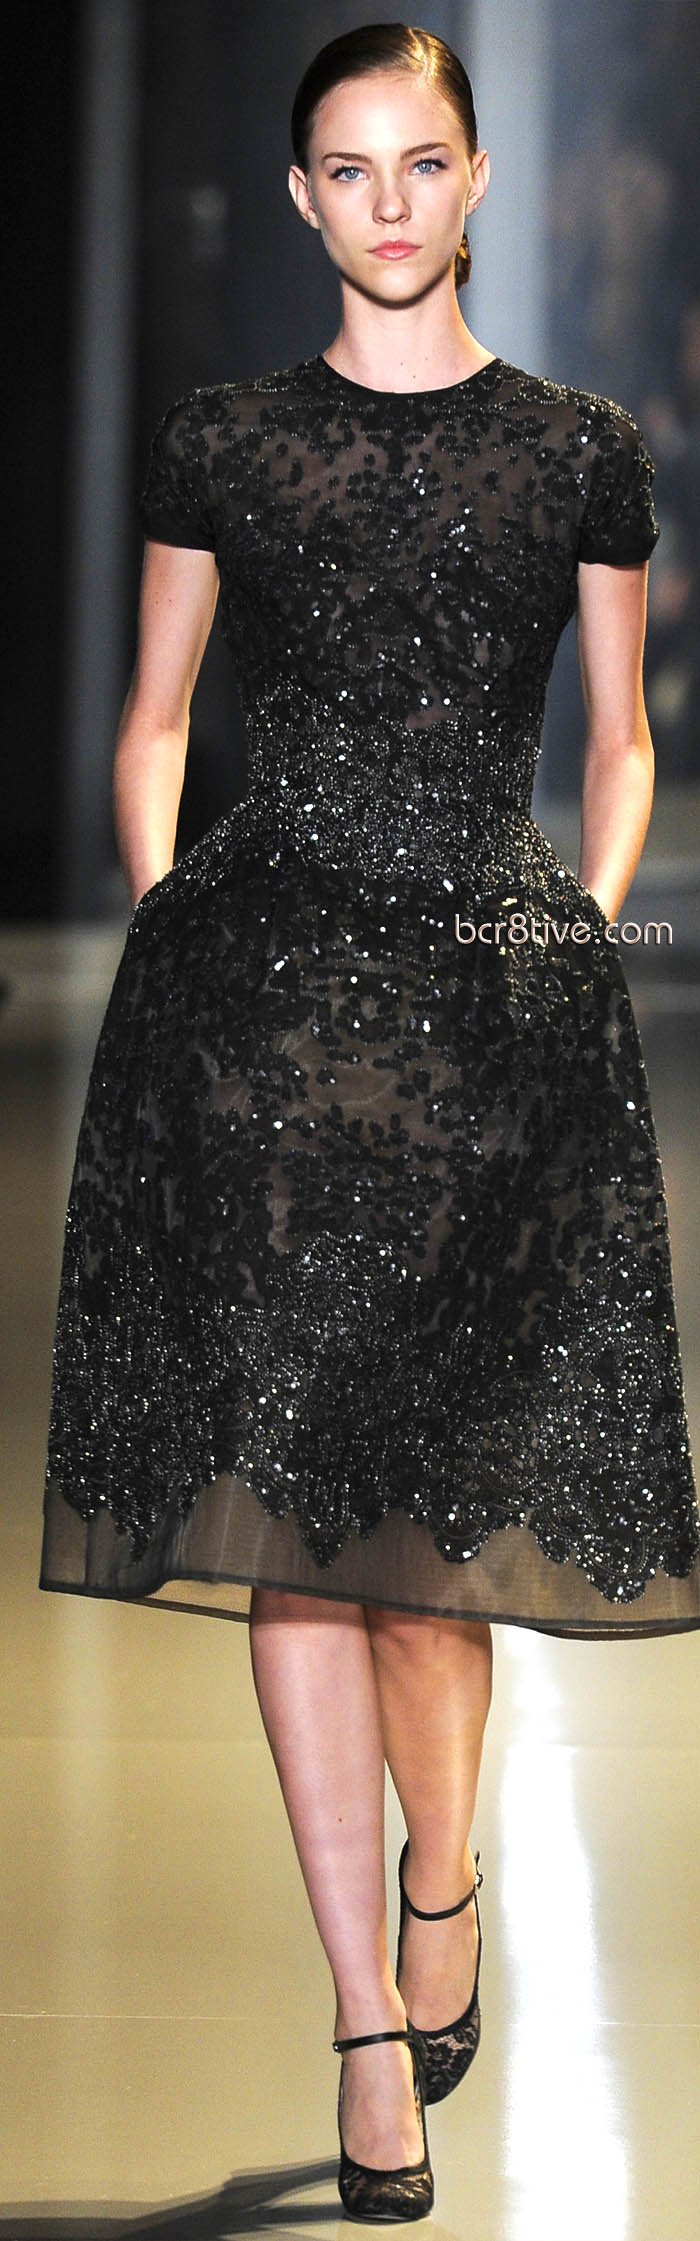 Elie Saab Spring Summer 2013 Haute Couture – Be Creative